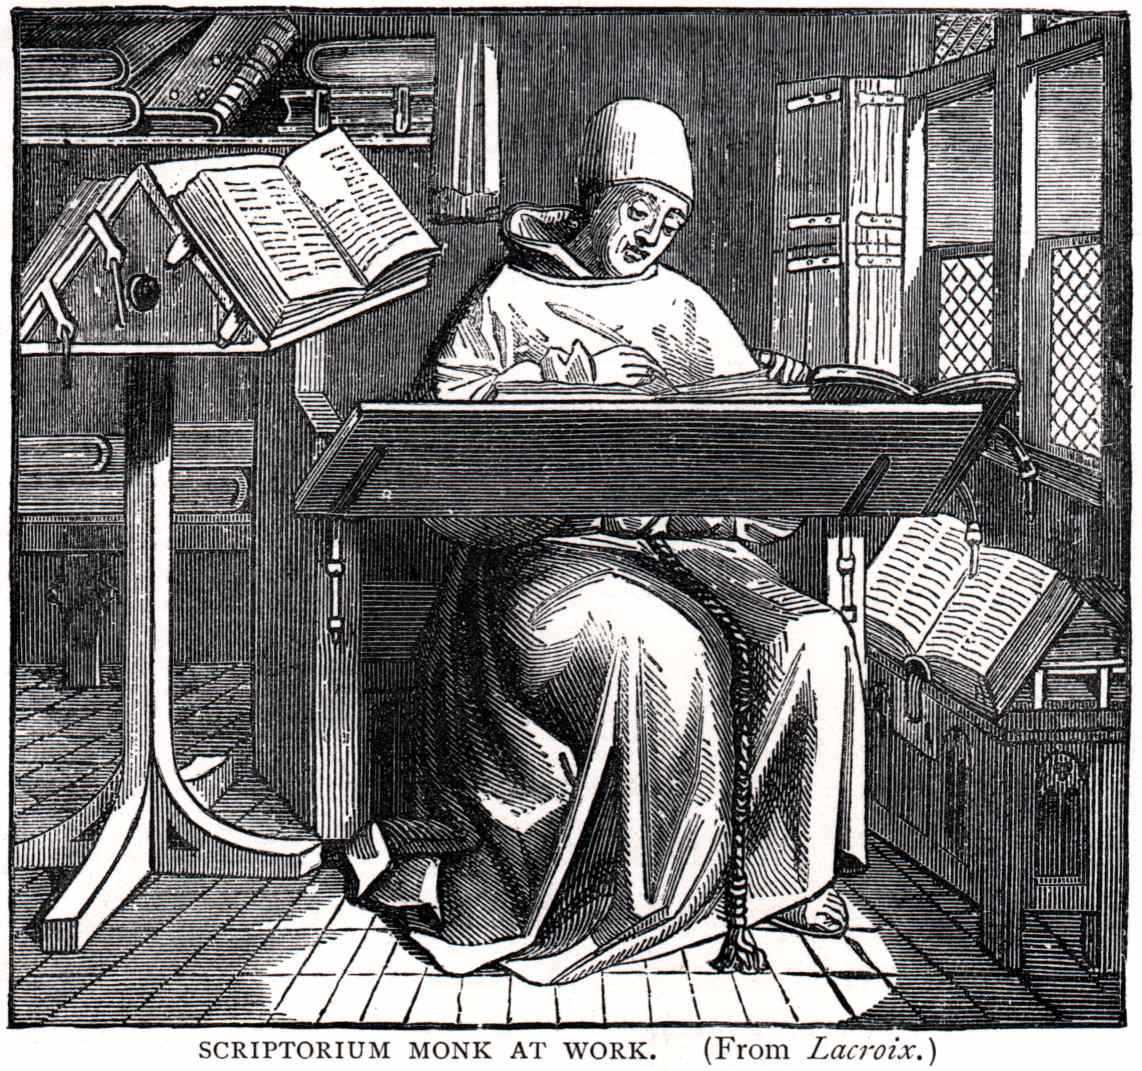 Detail of image depicting a monk at work in a medieval scriptorium (Lacroix).  Please click to view entire image.